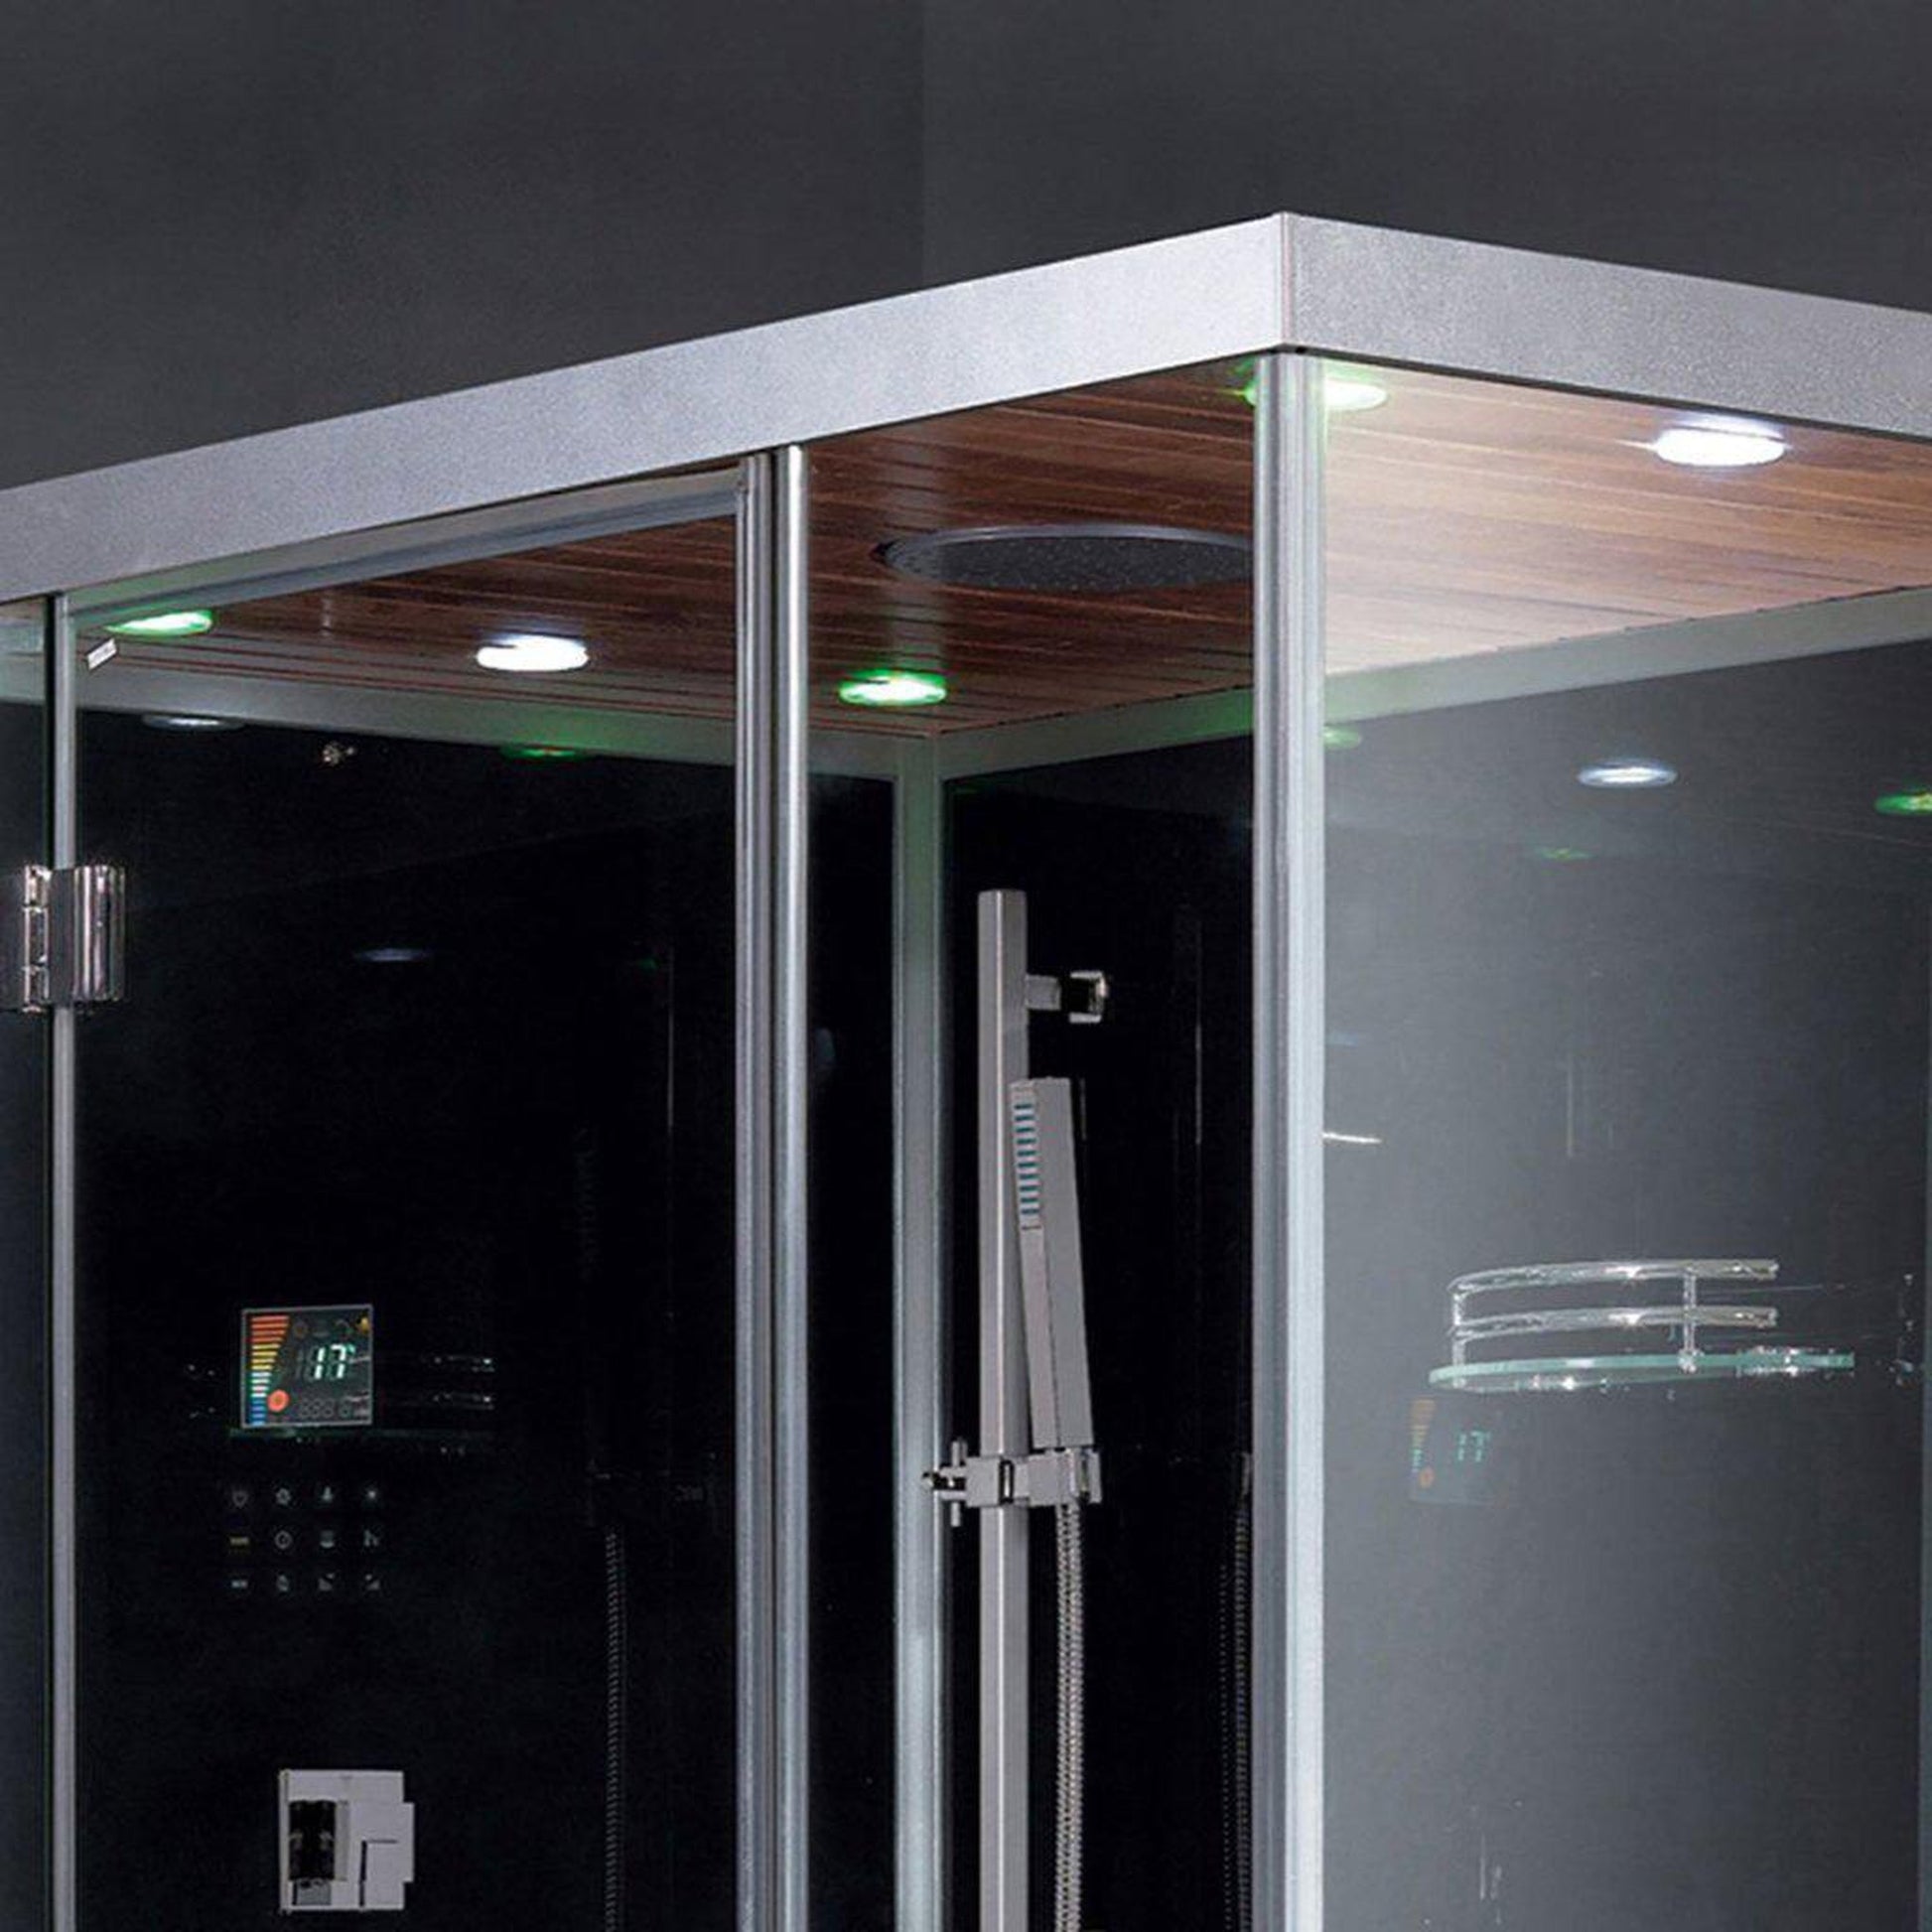 Platinum 59" x 35" x 89" Two-Person Black Framed Rectangle Walk-In Steam Shower With Right Handed Control Panel Configuration Hinged Door 6 Massage Jets & LED Chromatherapy Lighting